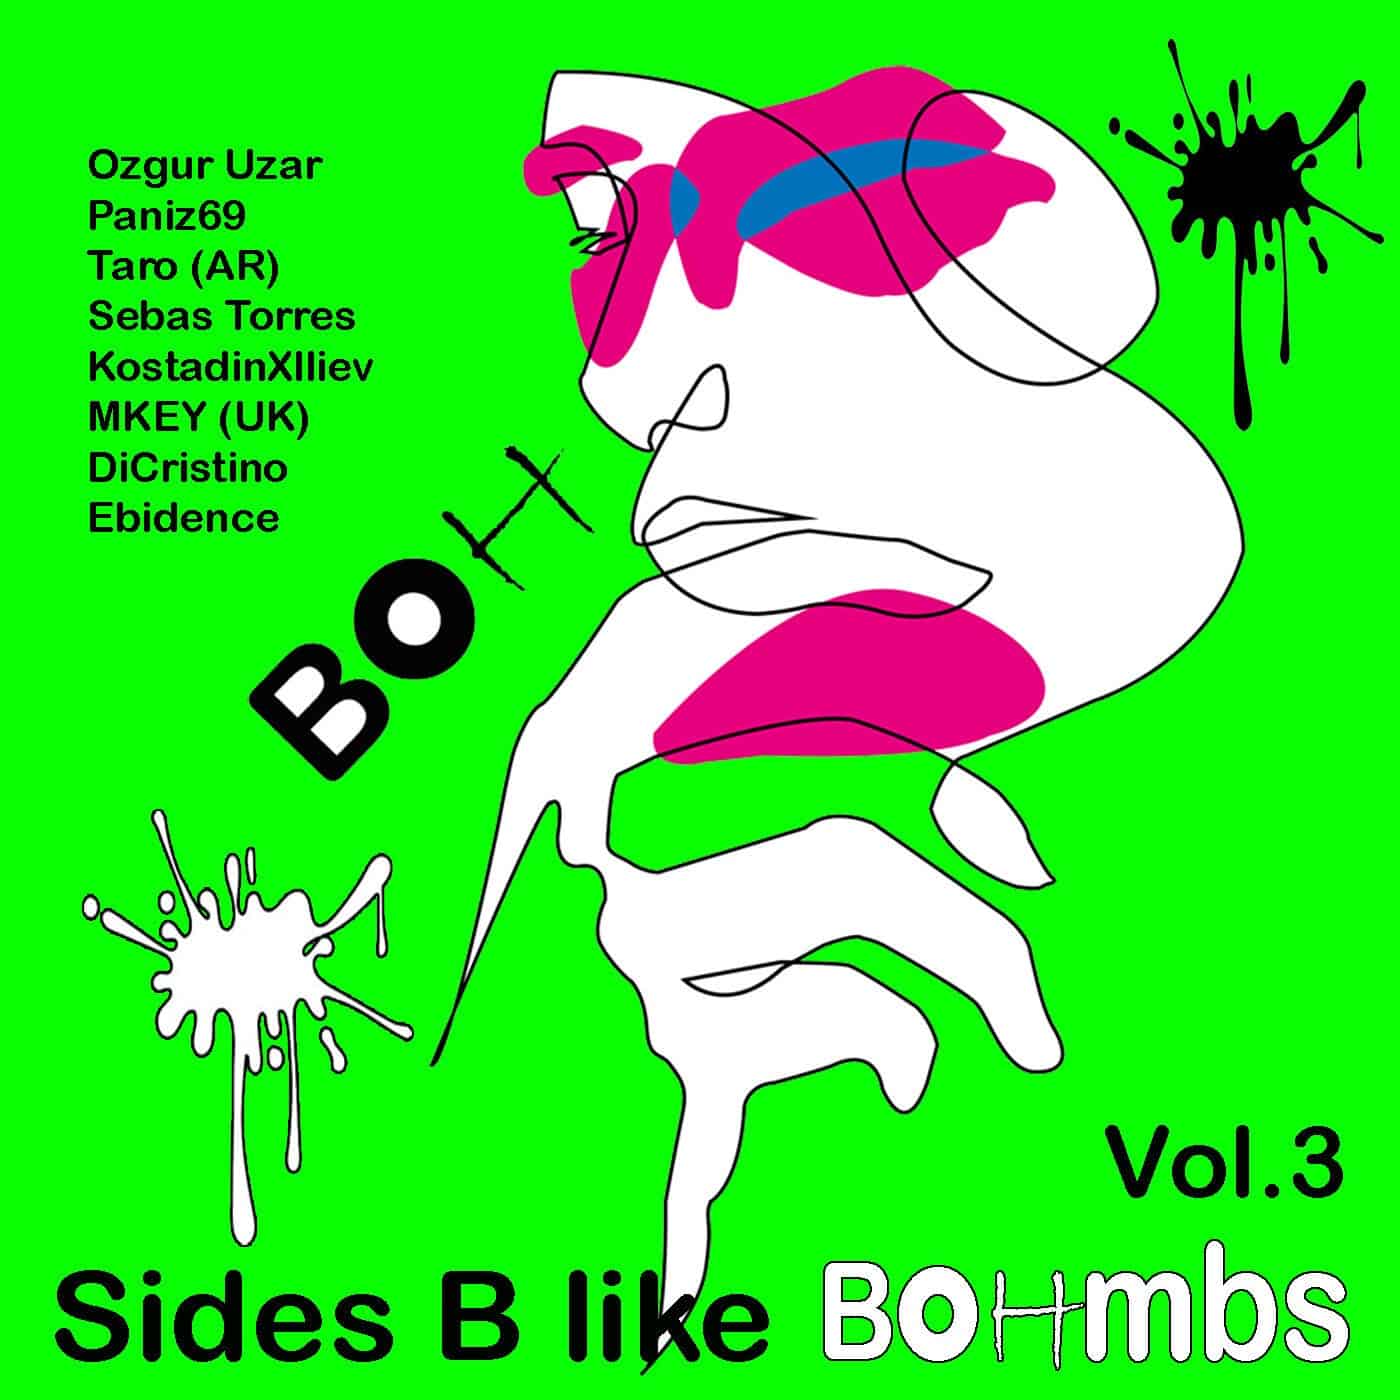 Download Sides B Like Bohmbs Vol.3 on Electrobuzz